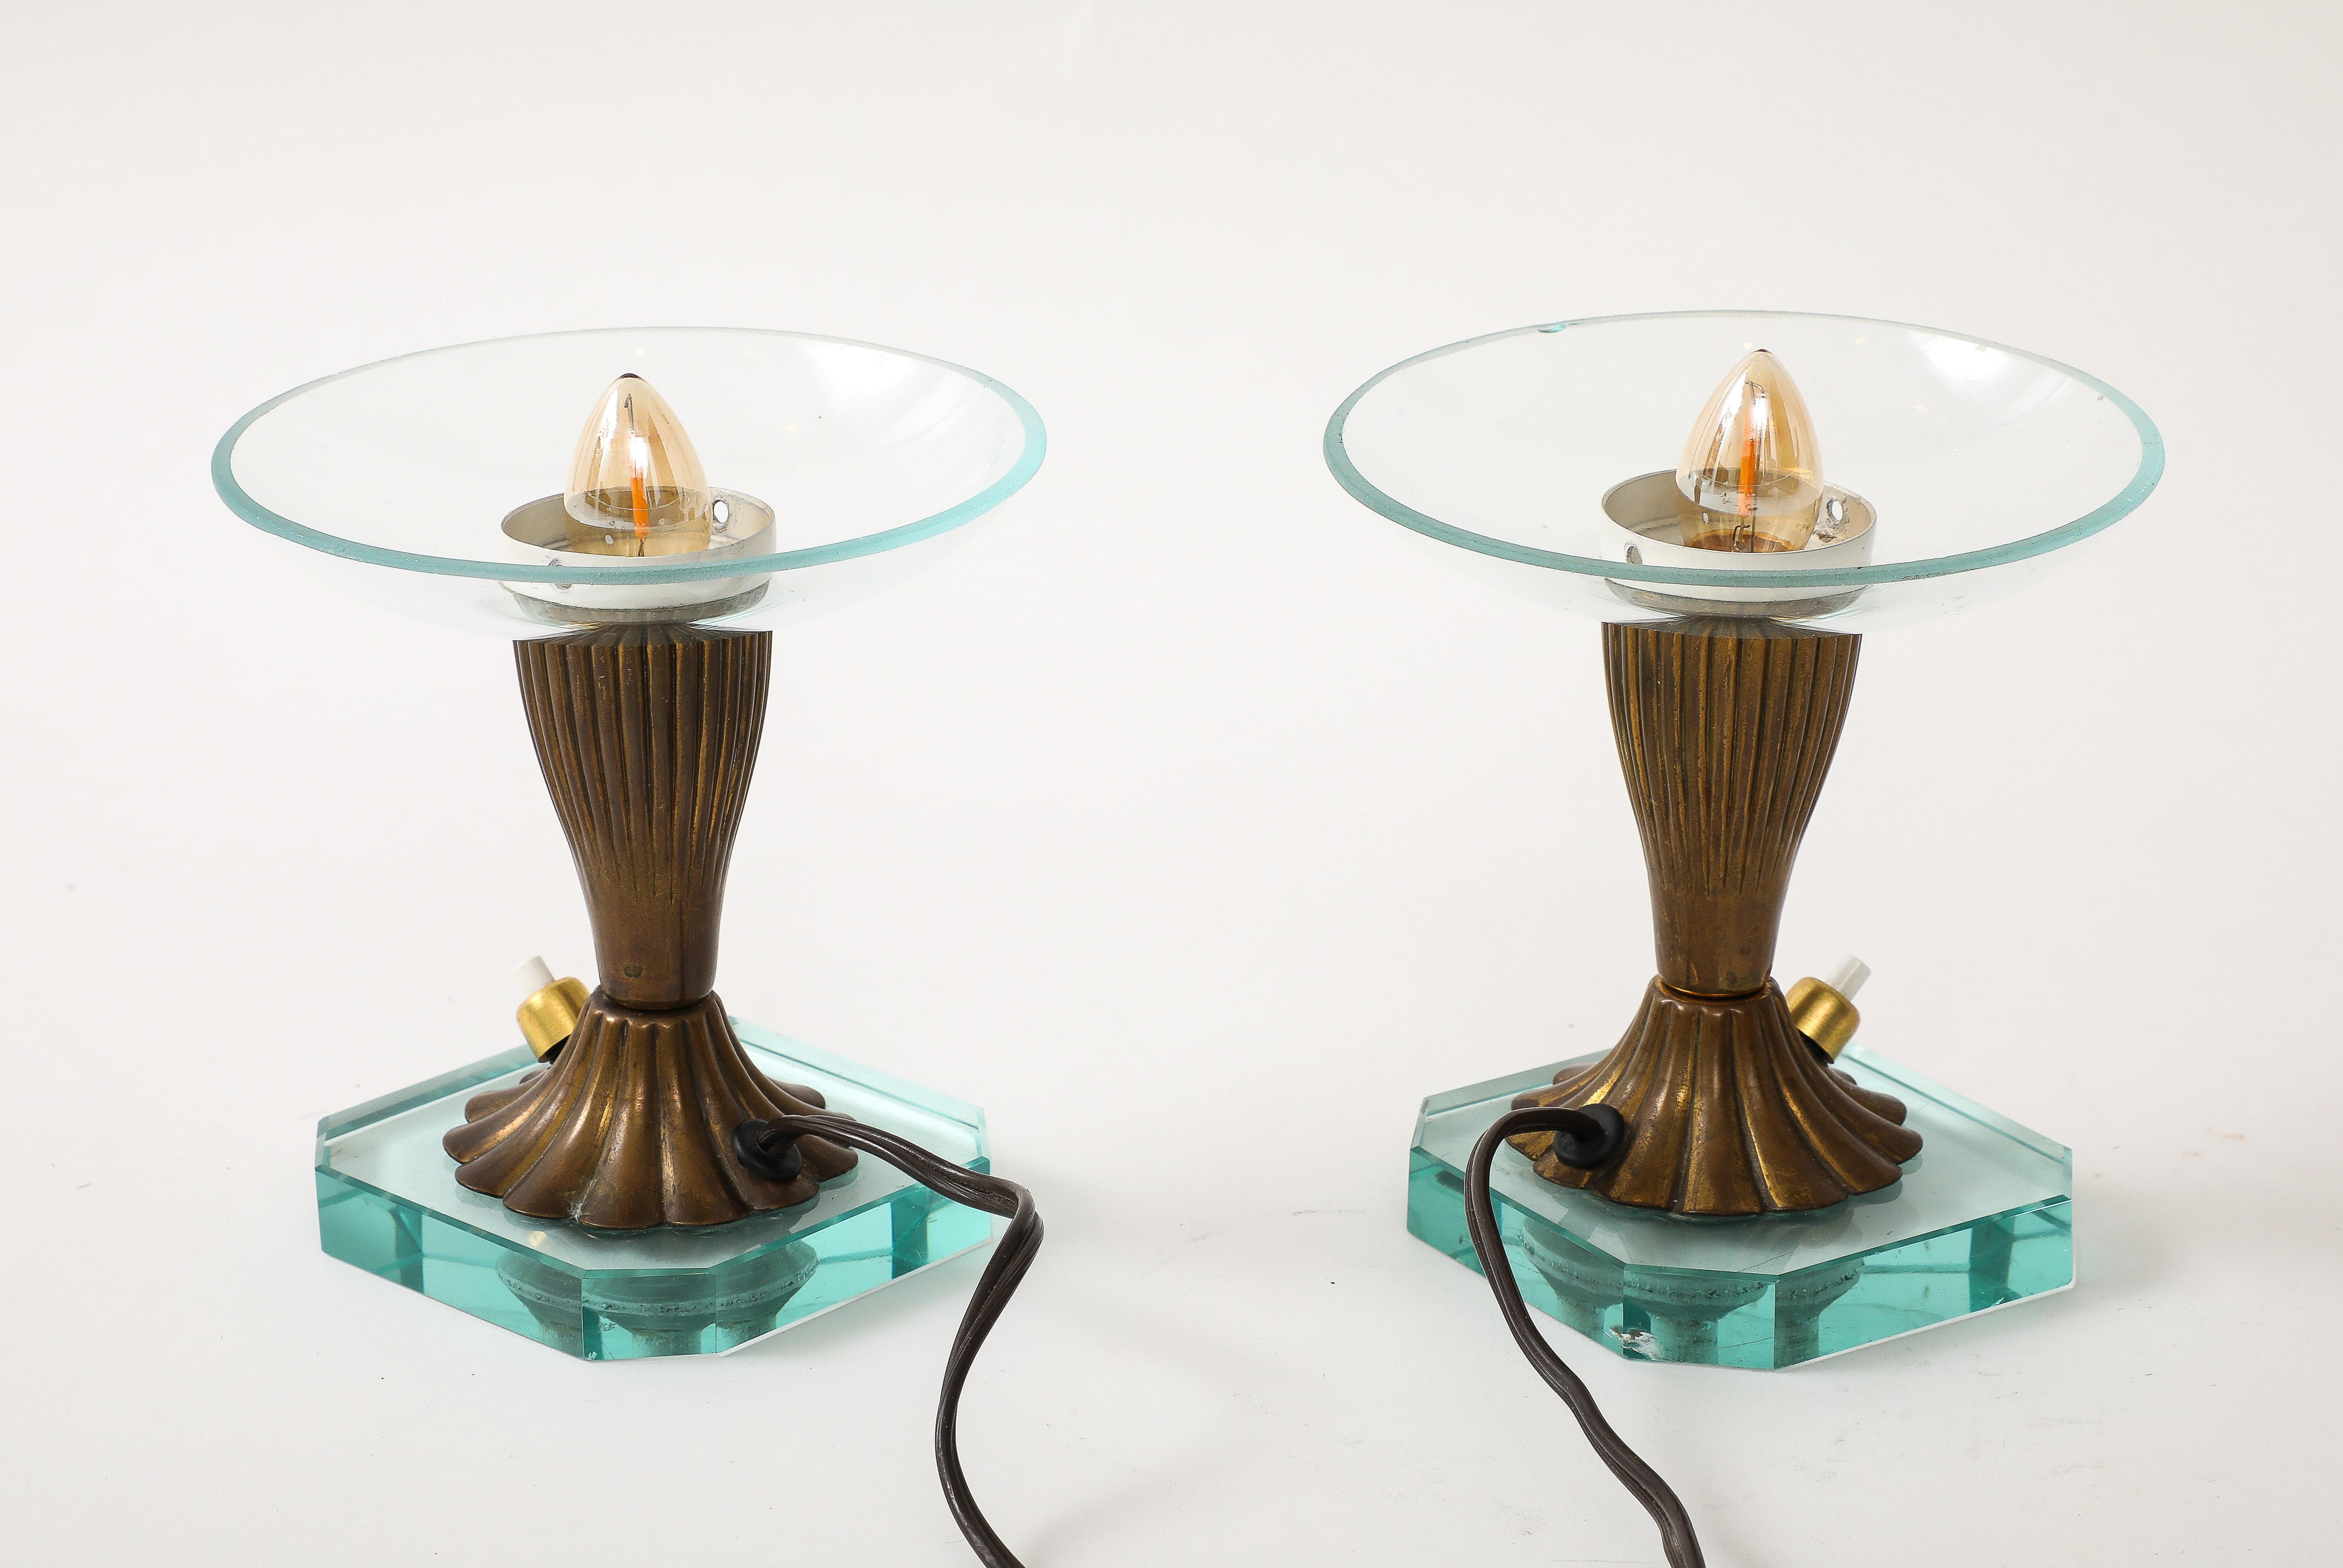 Pair of Glass & Brass Petite Table Lamps att. Pietro Chiesa - Italy 1940's For Sale 4